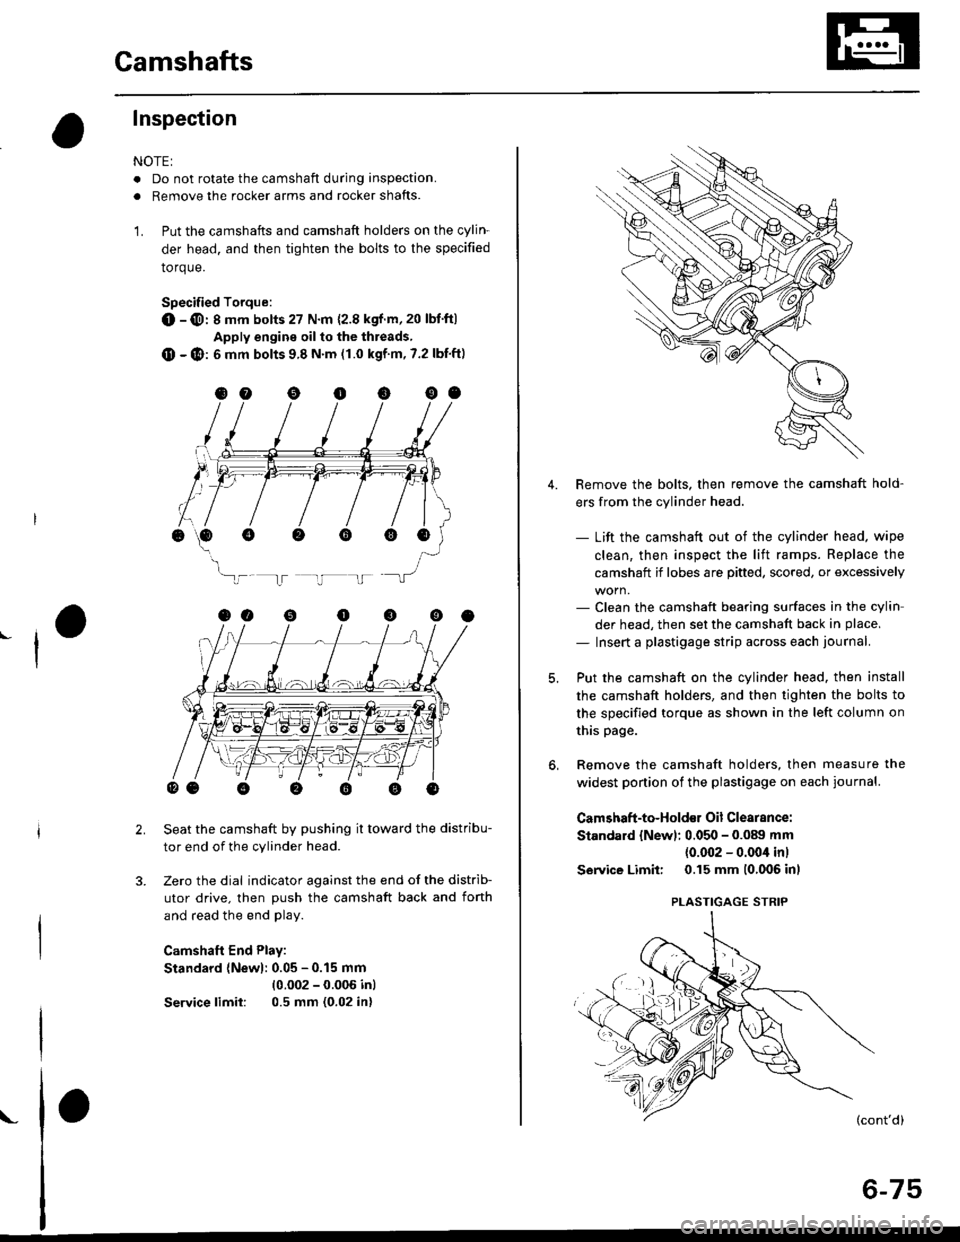 HONDA CIVIC 1996 6.G Owners Guide Camshafts
Inspection
NOTE:
. Do not rotate the camshaft during inspection.
. Removg the rocker arms and rocker shafts.
L Put the camshafts and camshaft holders on the cylin-
der head. and then tighte